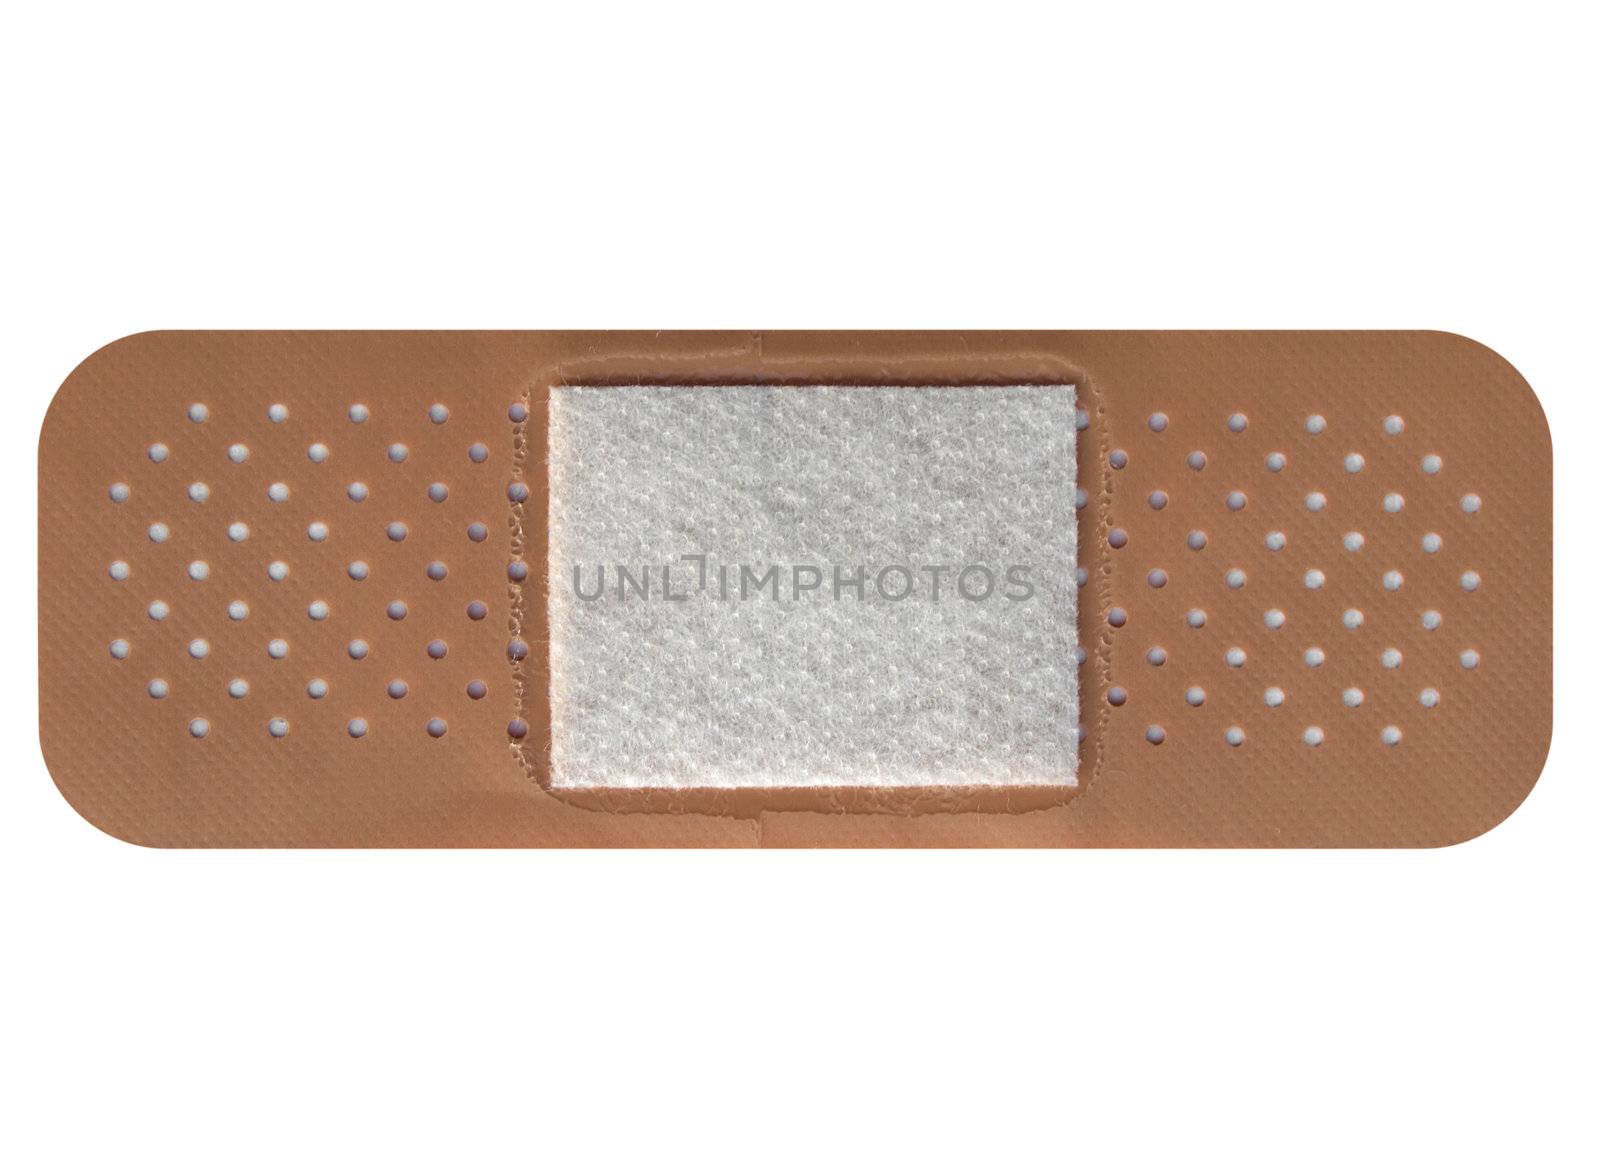 Band aid isolated over a white background